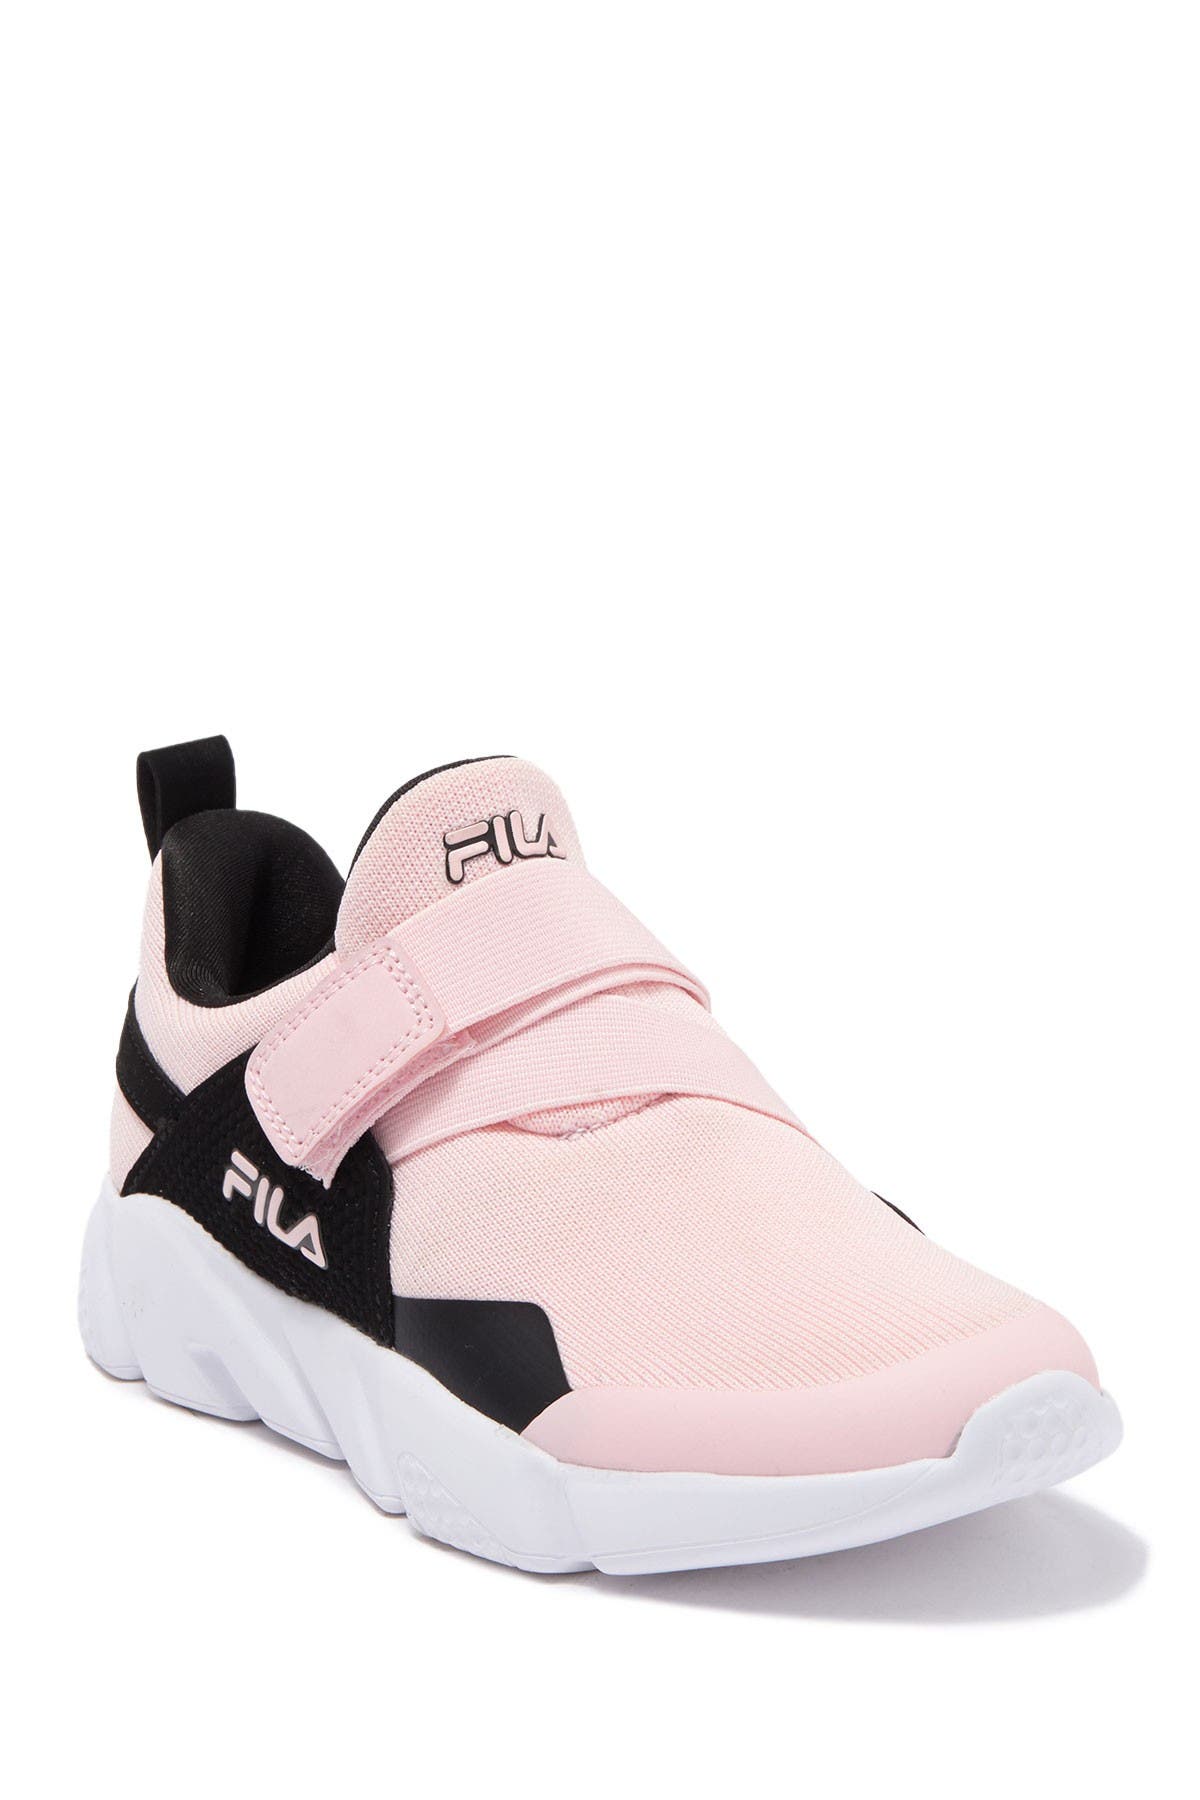 fila outfits for babies